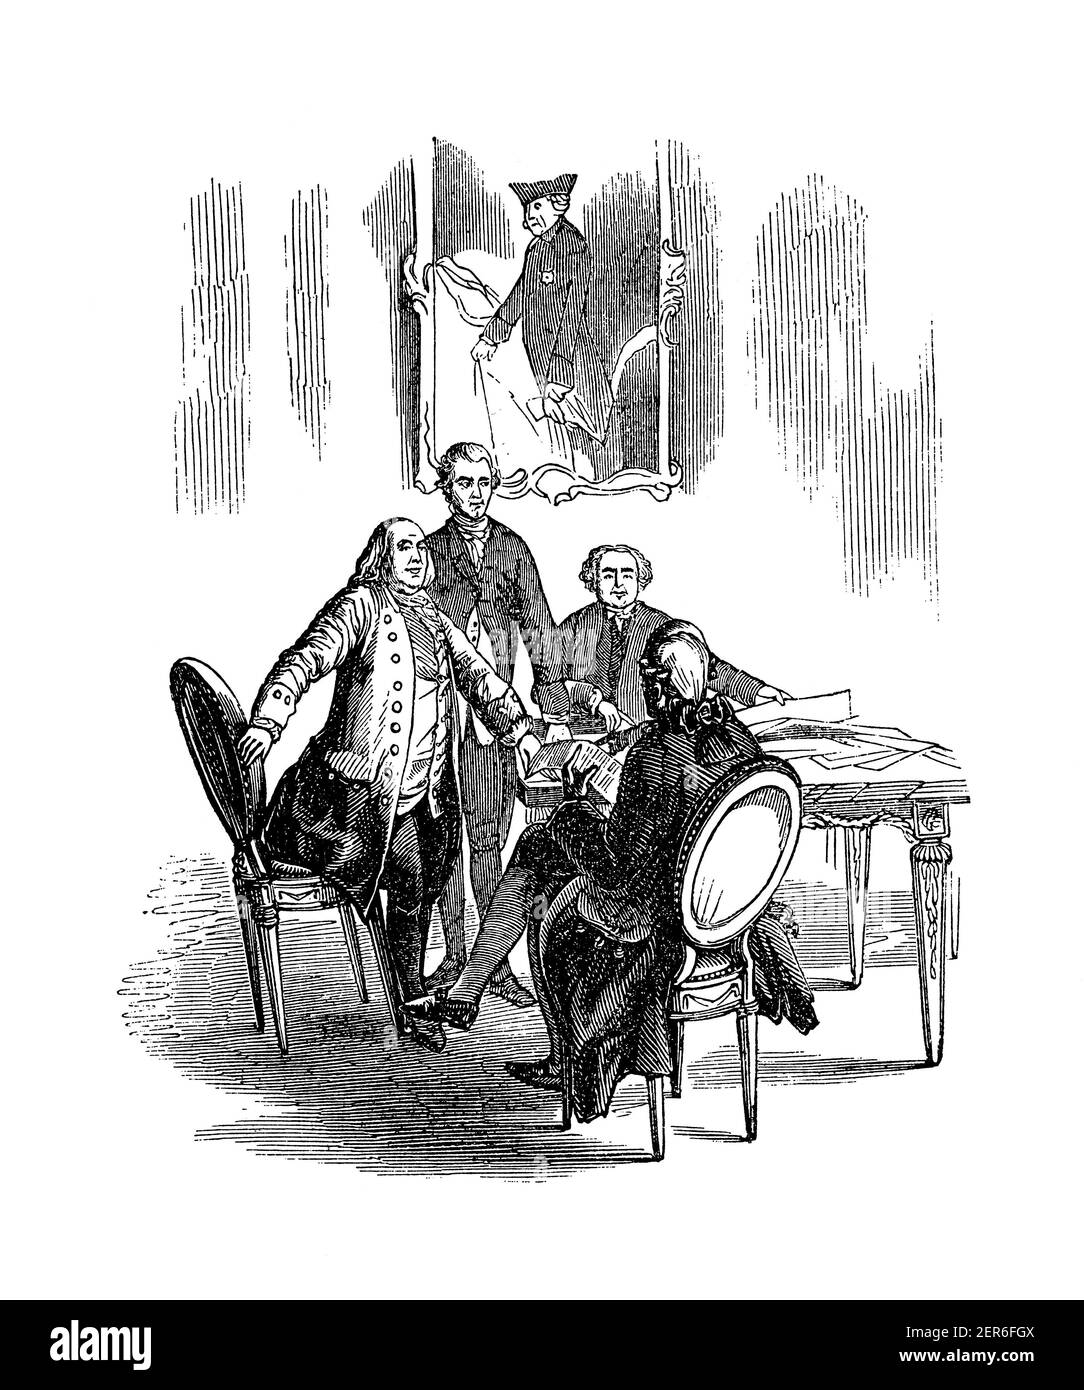 19th-century engraving showing American commissioners negotiating the Treaty of Paris of 1783, which ended the American Revolutionary War between Grea Stock Photo